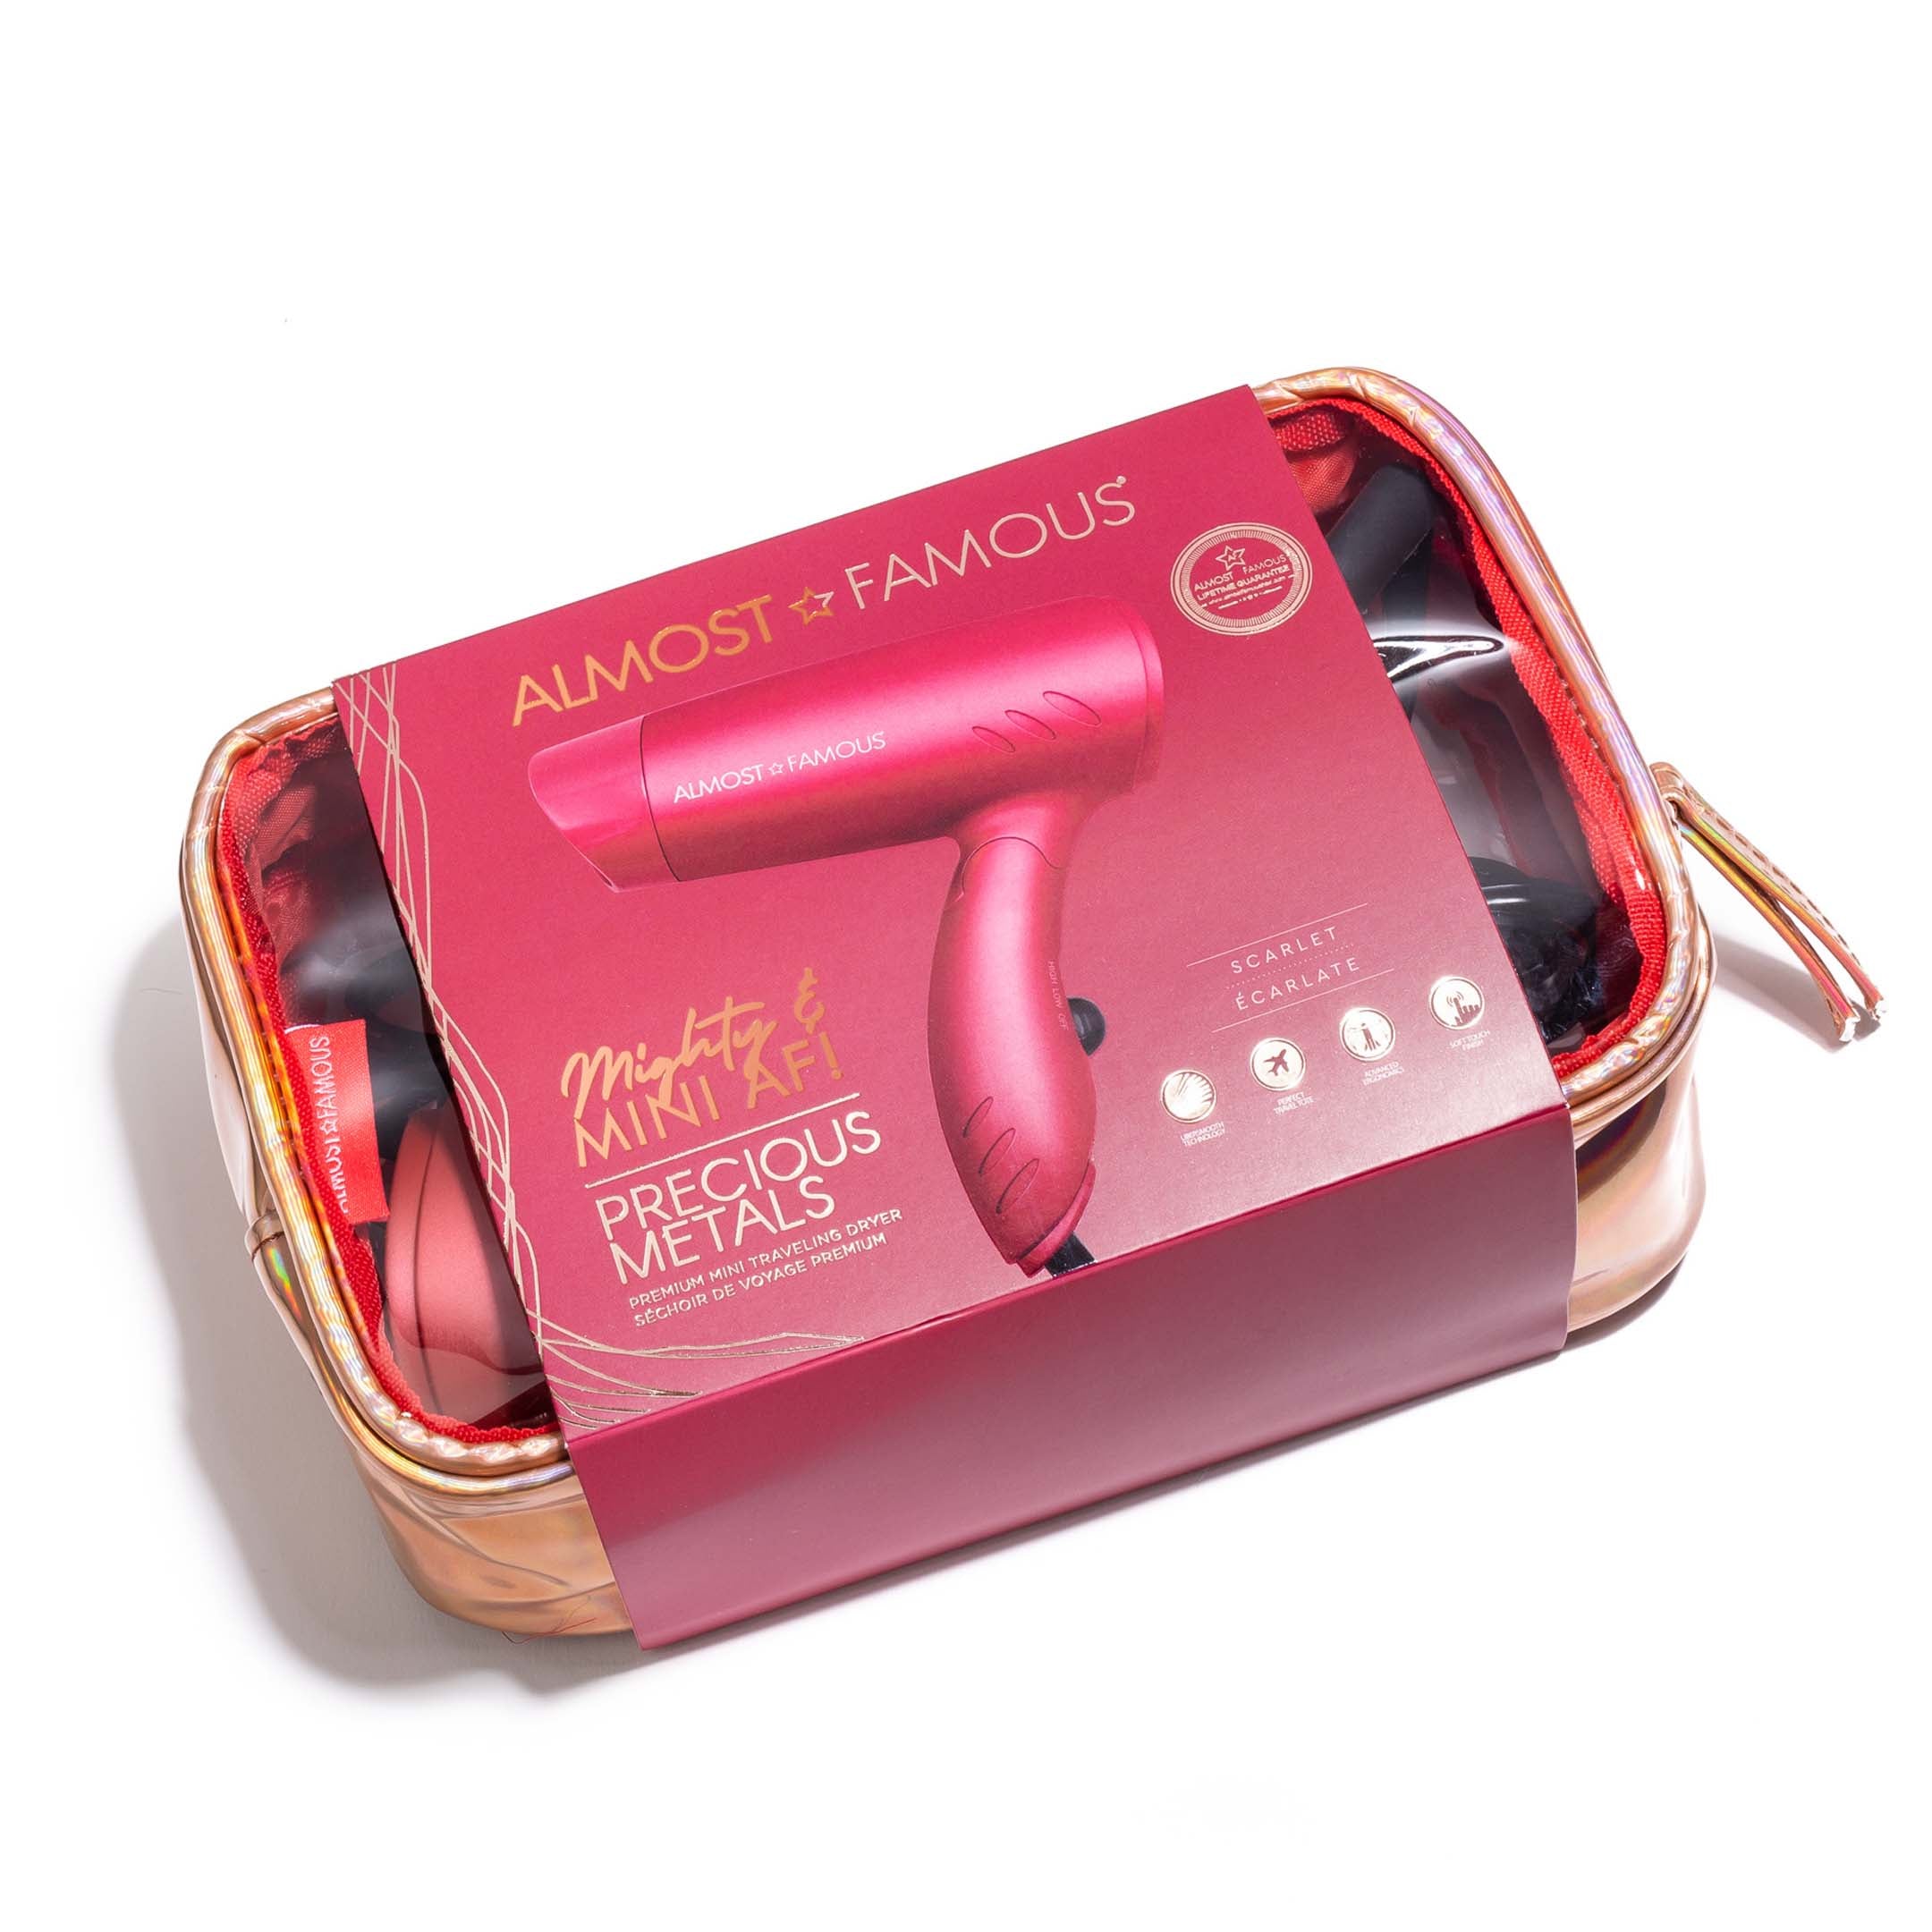 Mighty AF Mini Travel Dryer with Holotone Carrying Bag